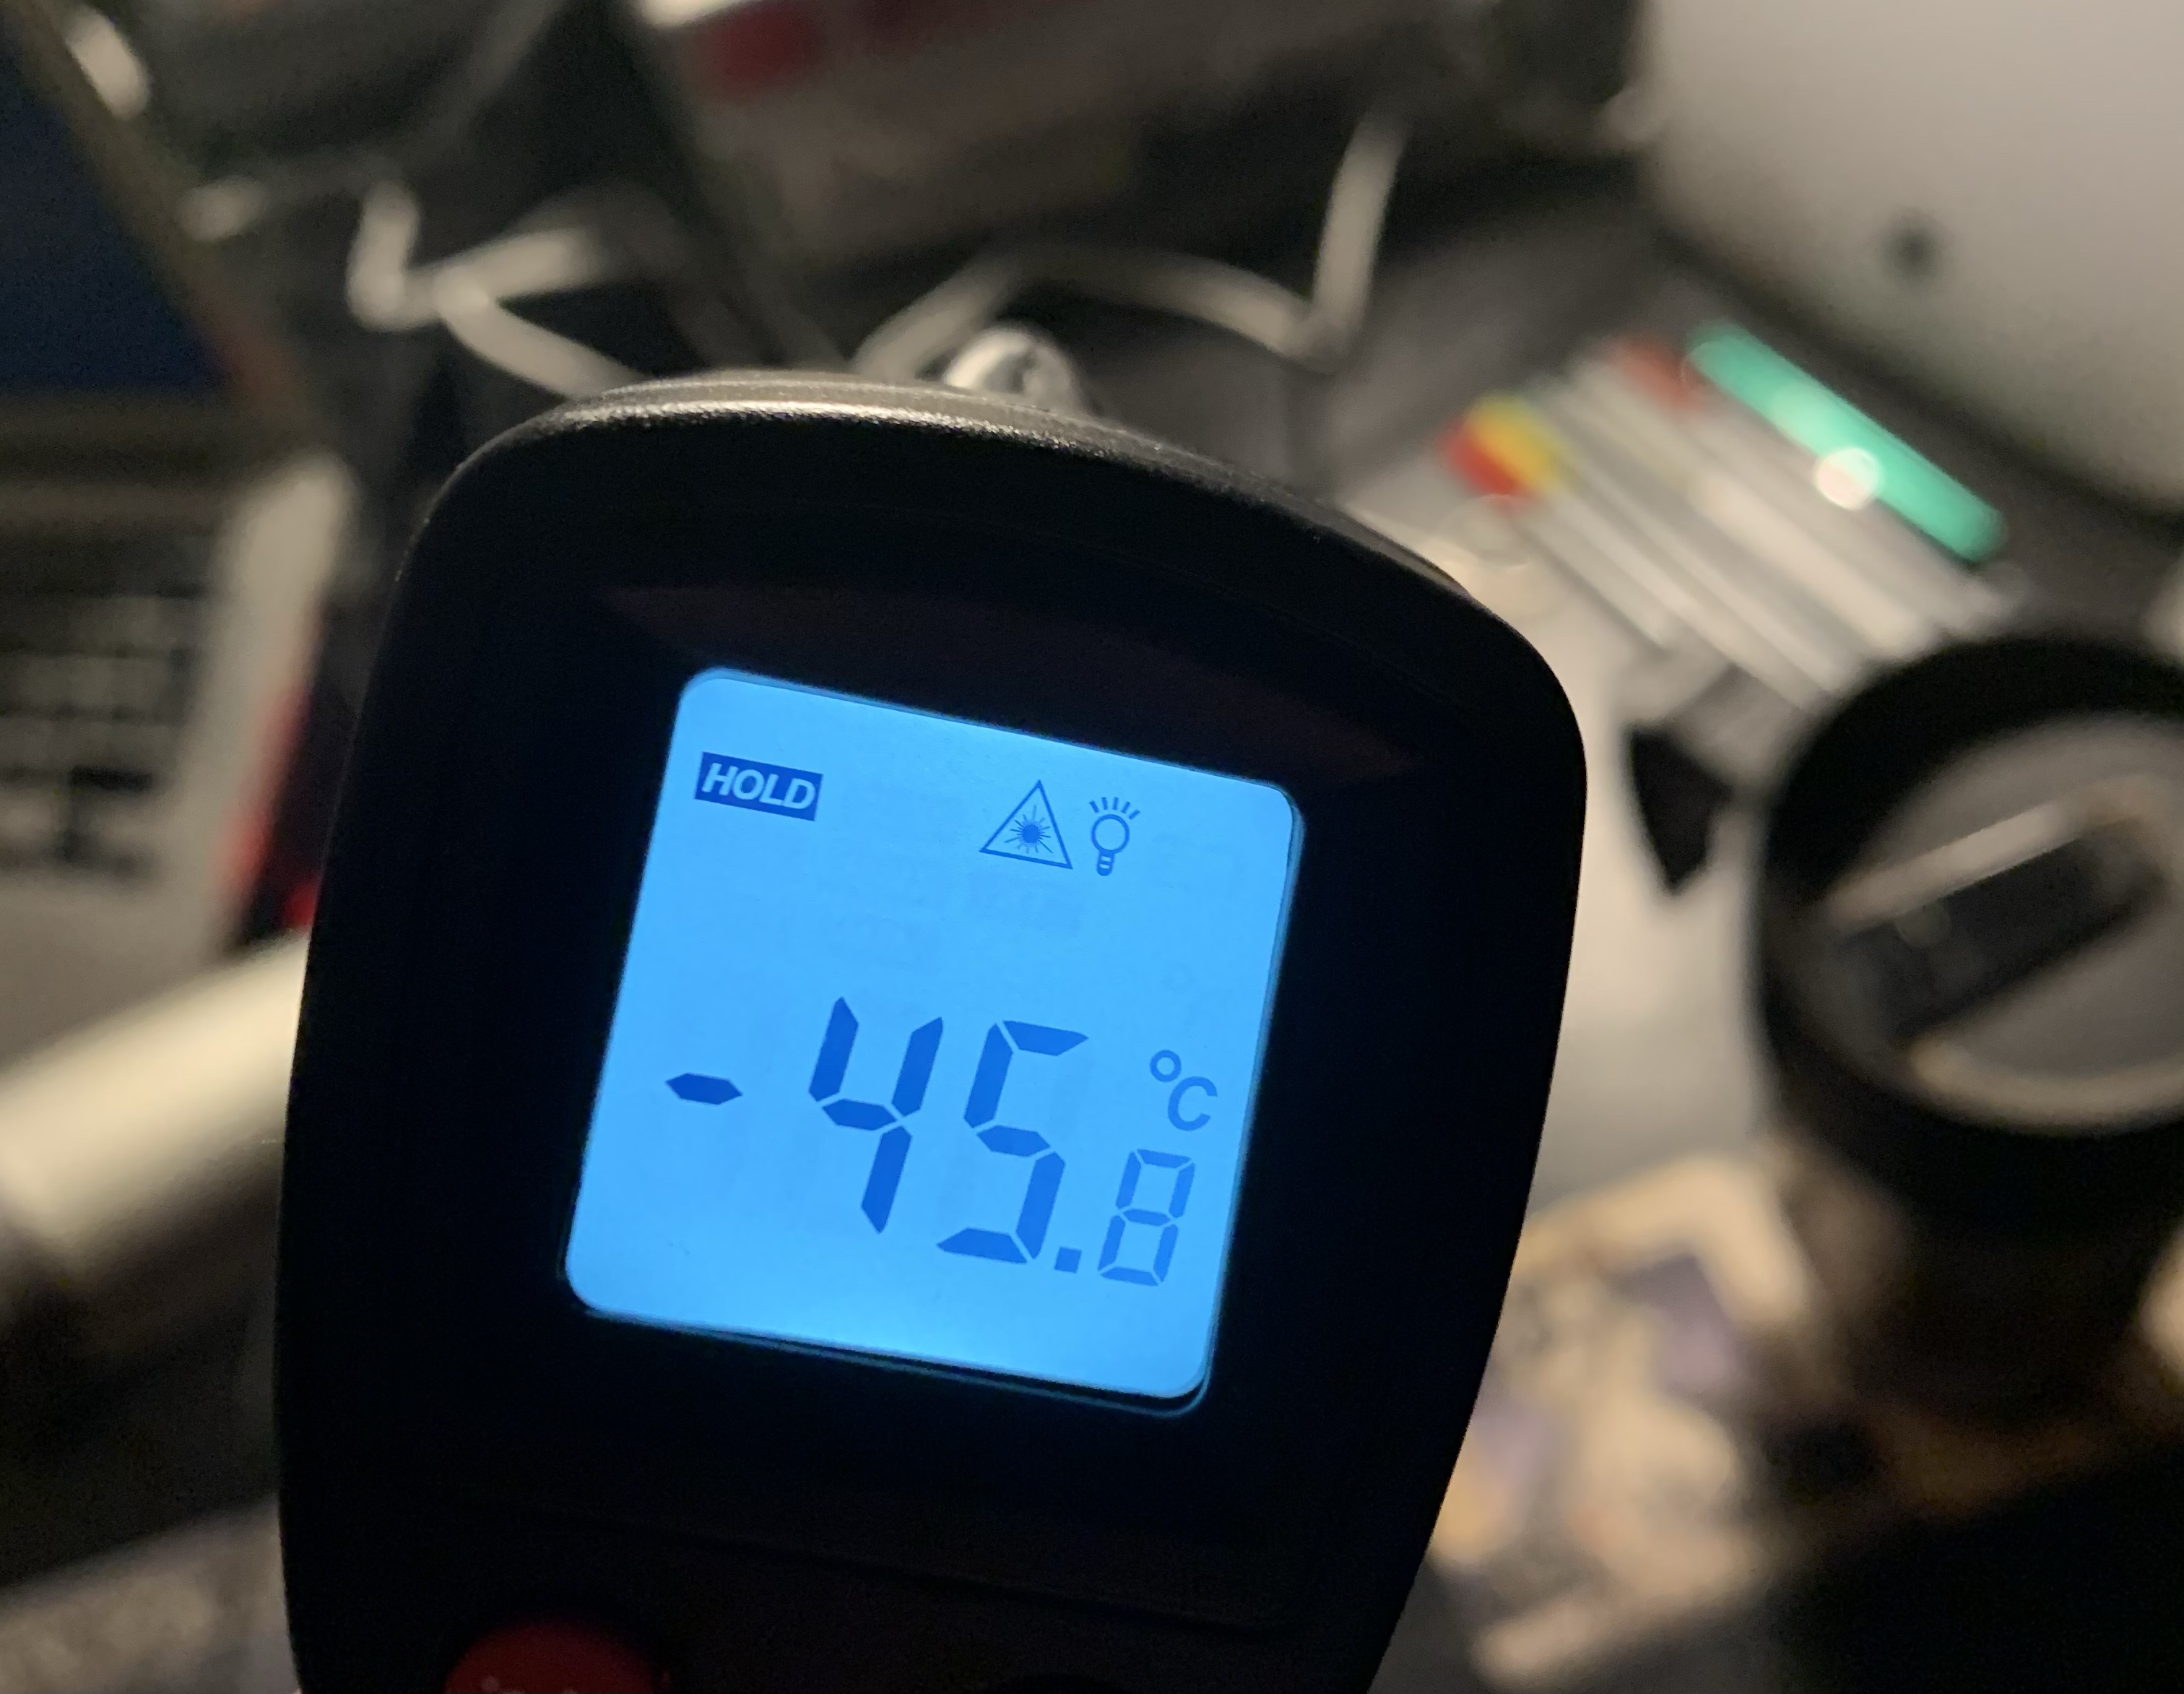 Infrared thermometer showing a temperature of -45.8 Celsius